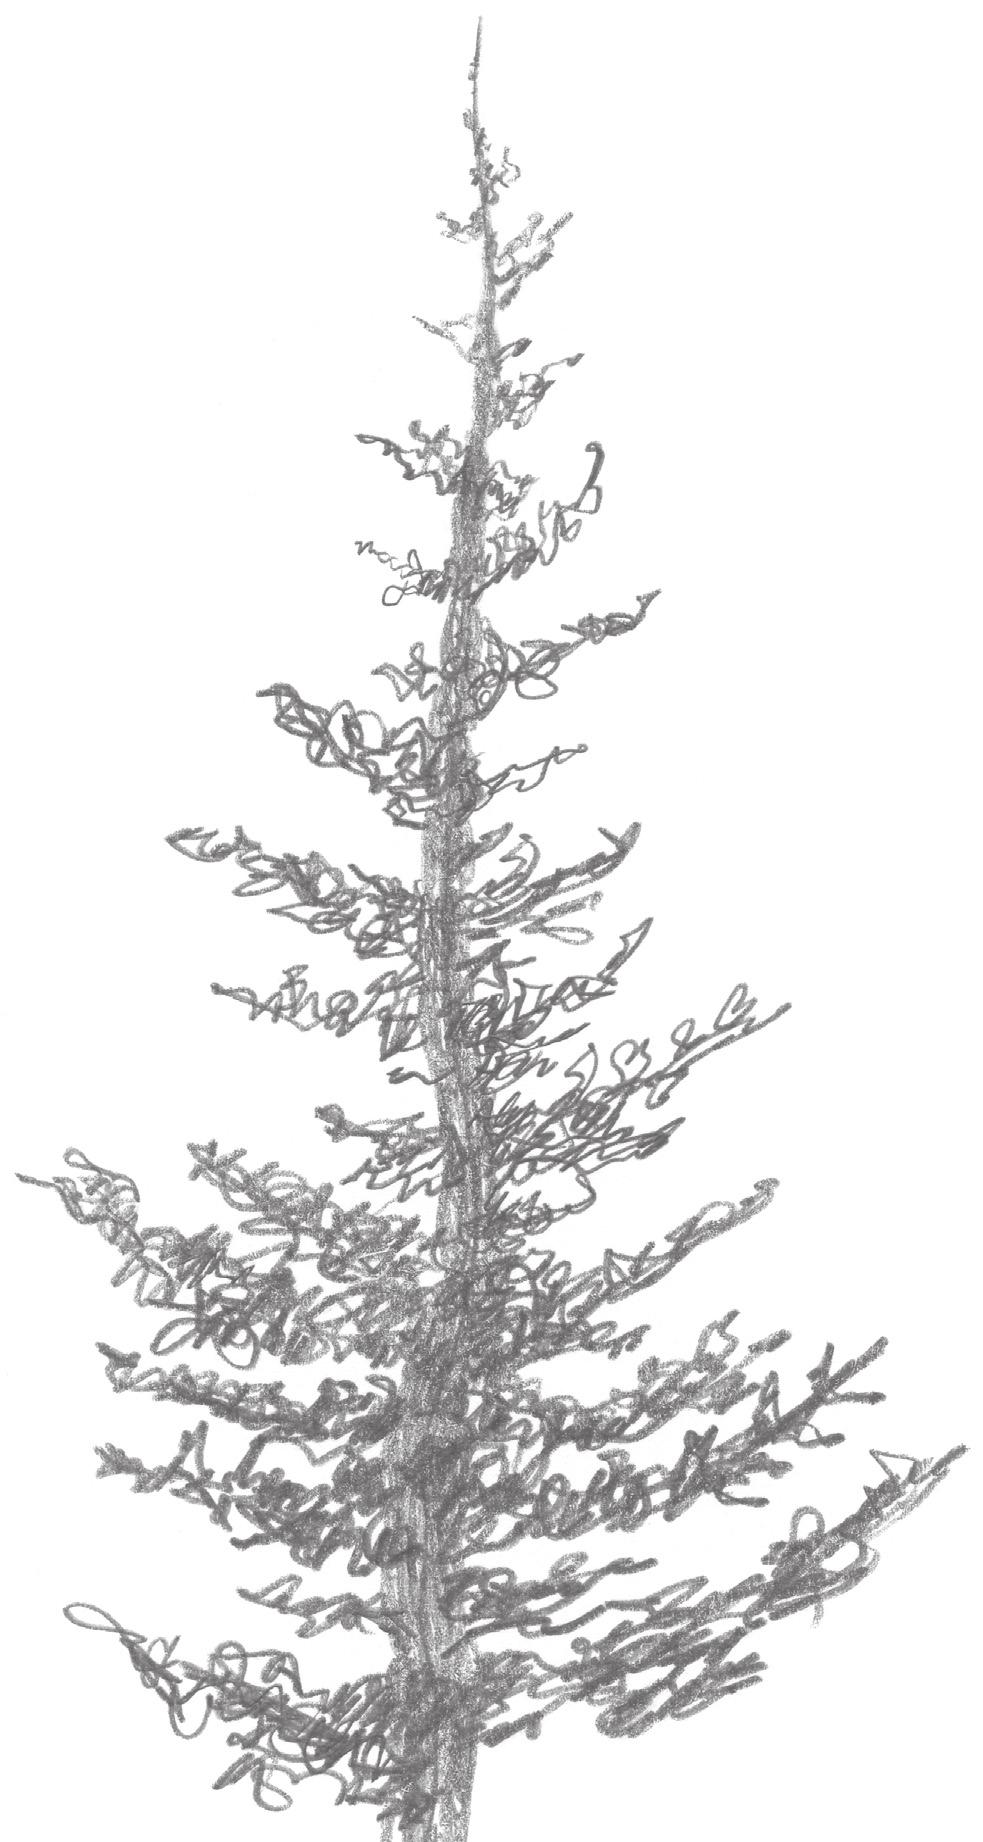 4 Figure 8 Tip! For a more realistic looking spruce tree, draw the lower branches wider and longer than the higher branches. Tip! Keep a pencil sharpener and sandpaper block handy so you can keep your pencil points sharp.